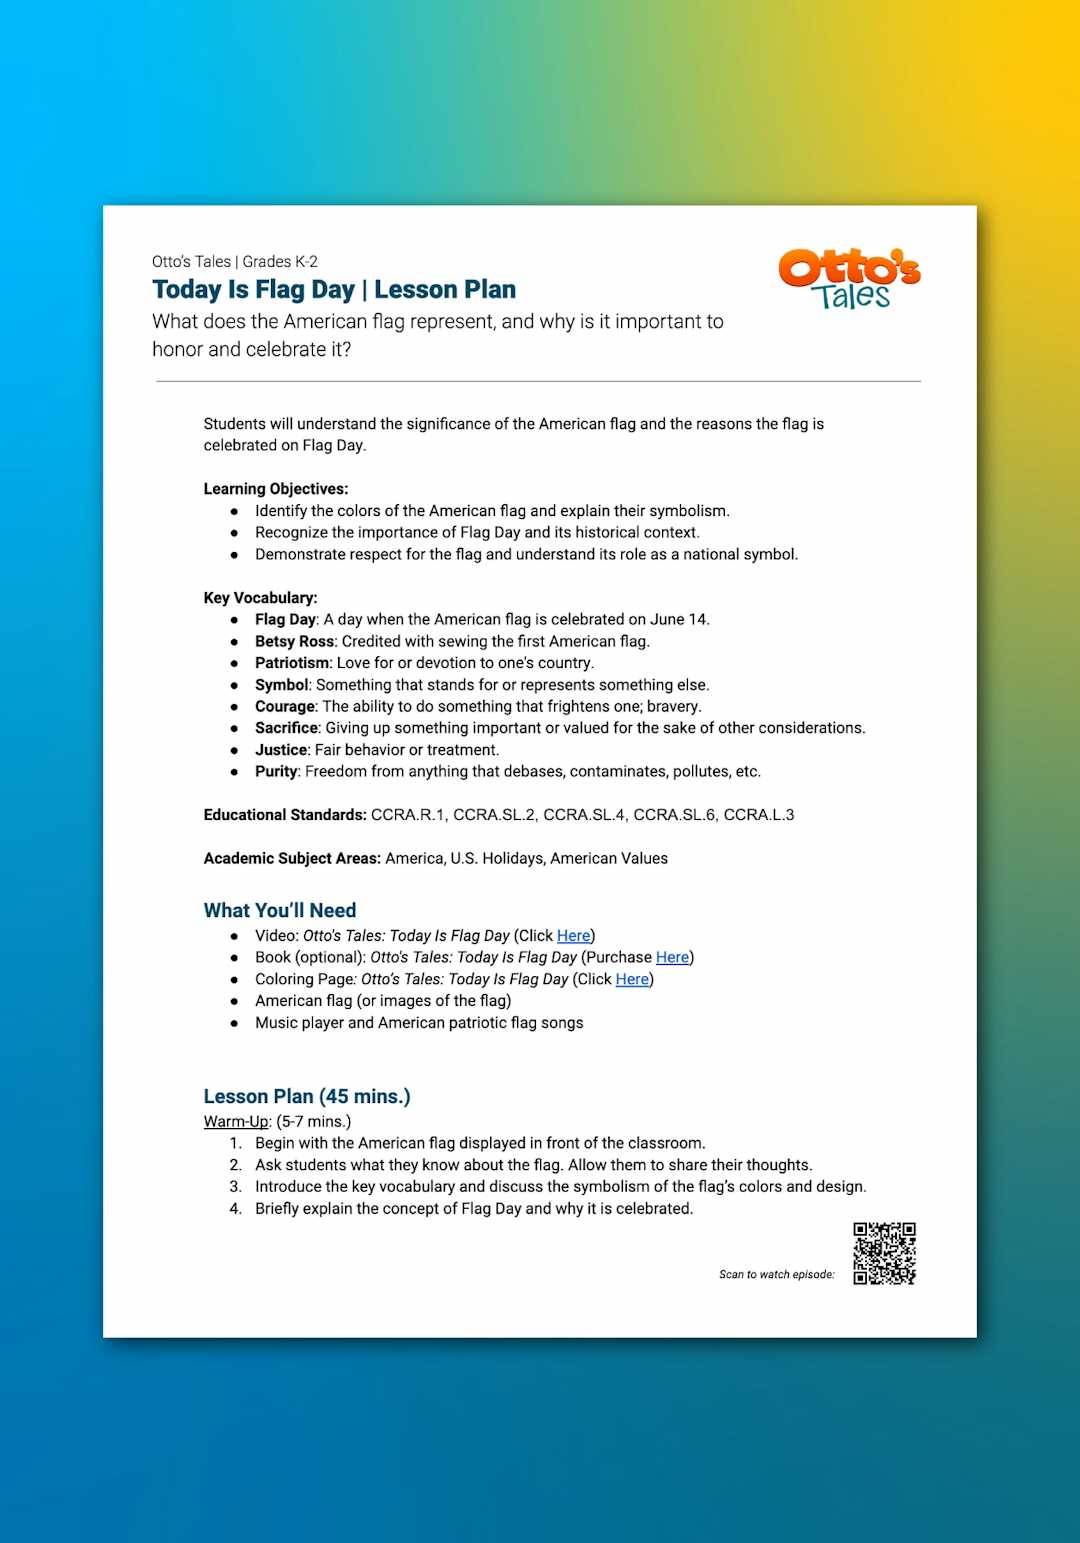 "Otto's Tales: Today Is Flag Day" Lesson Plan